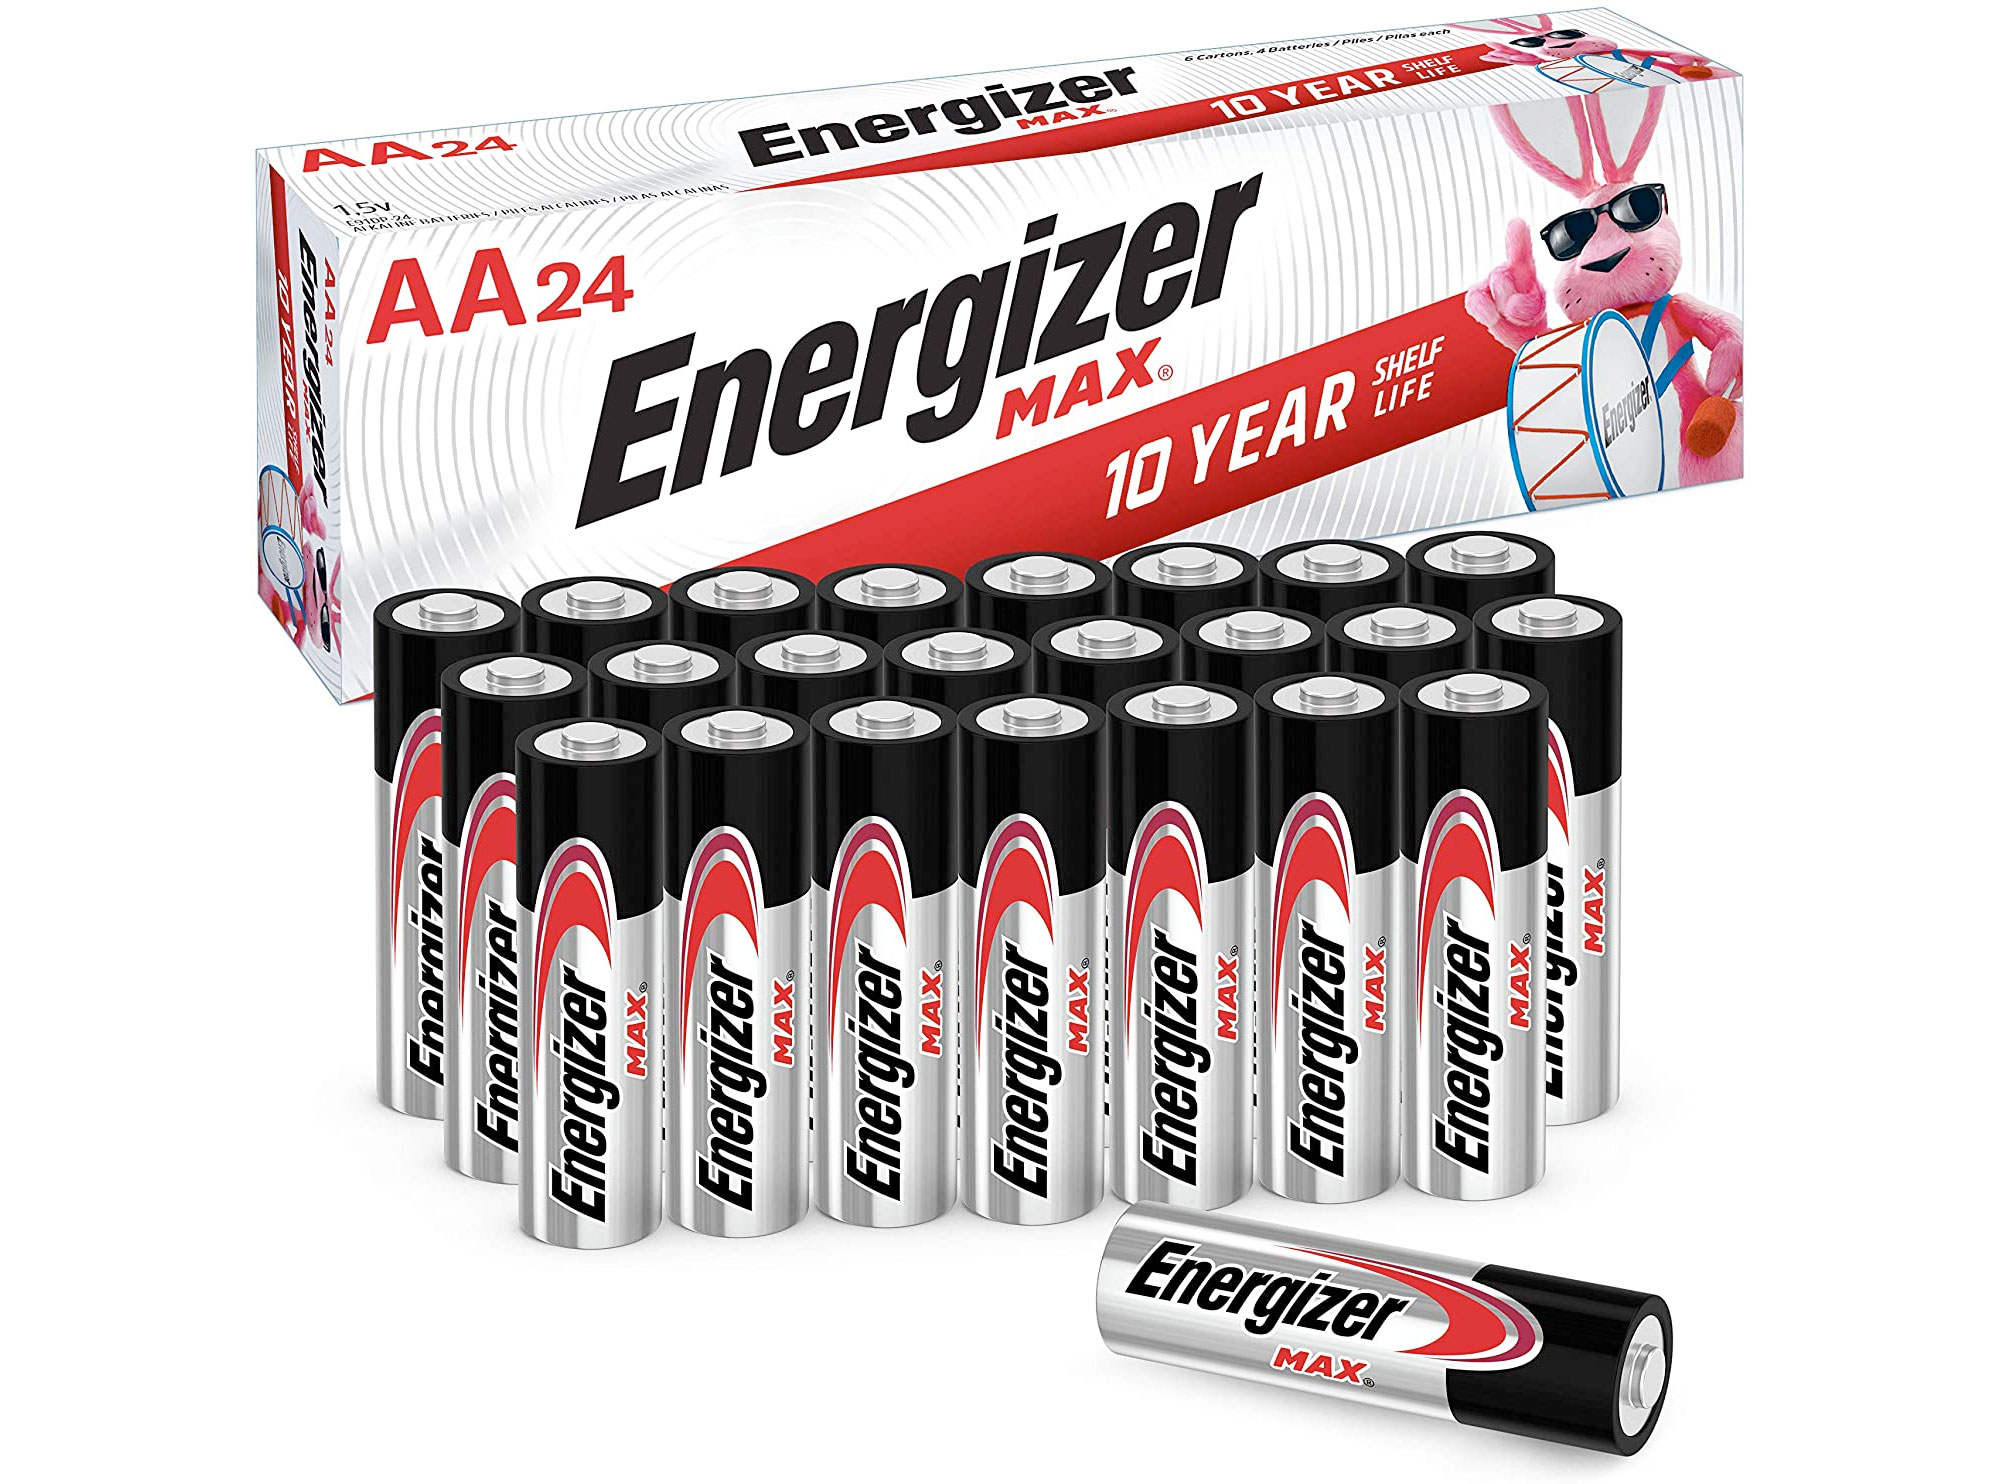 Amazon：Energizer MAX AA Batteries(24-Count)只卖$9.99